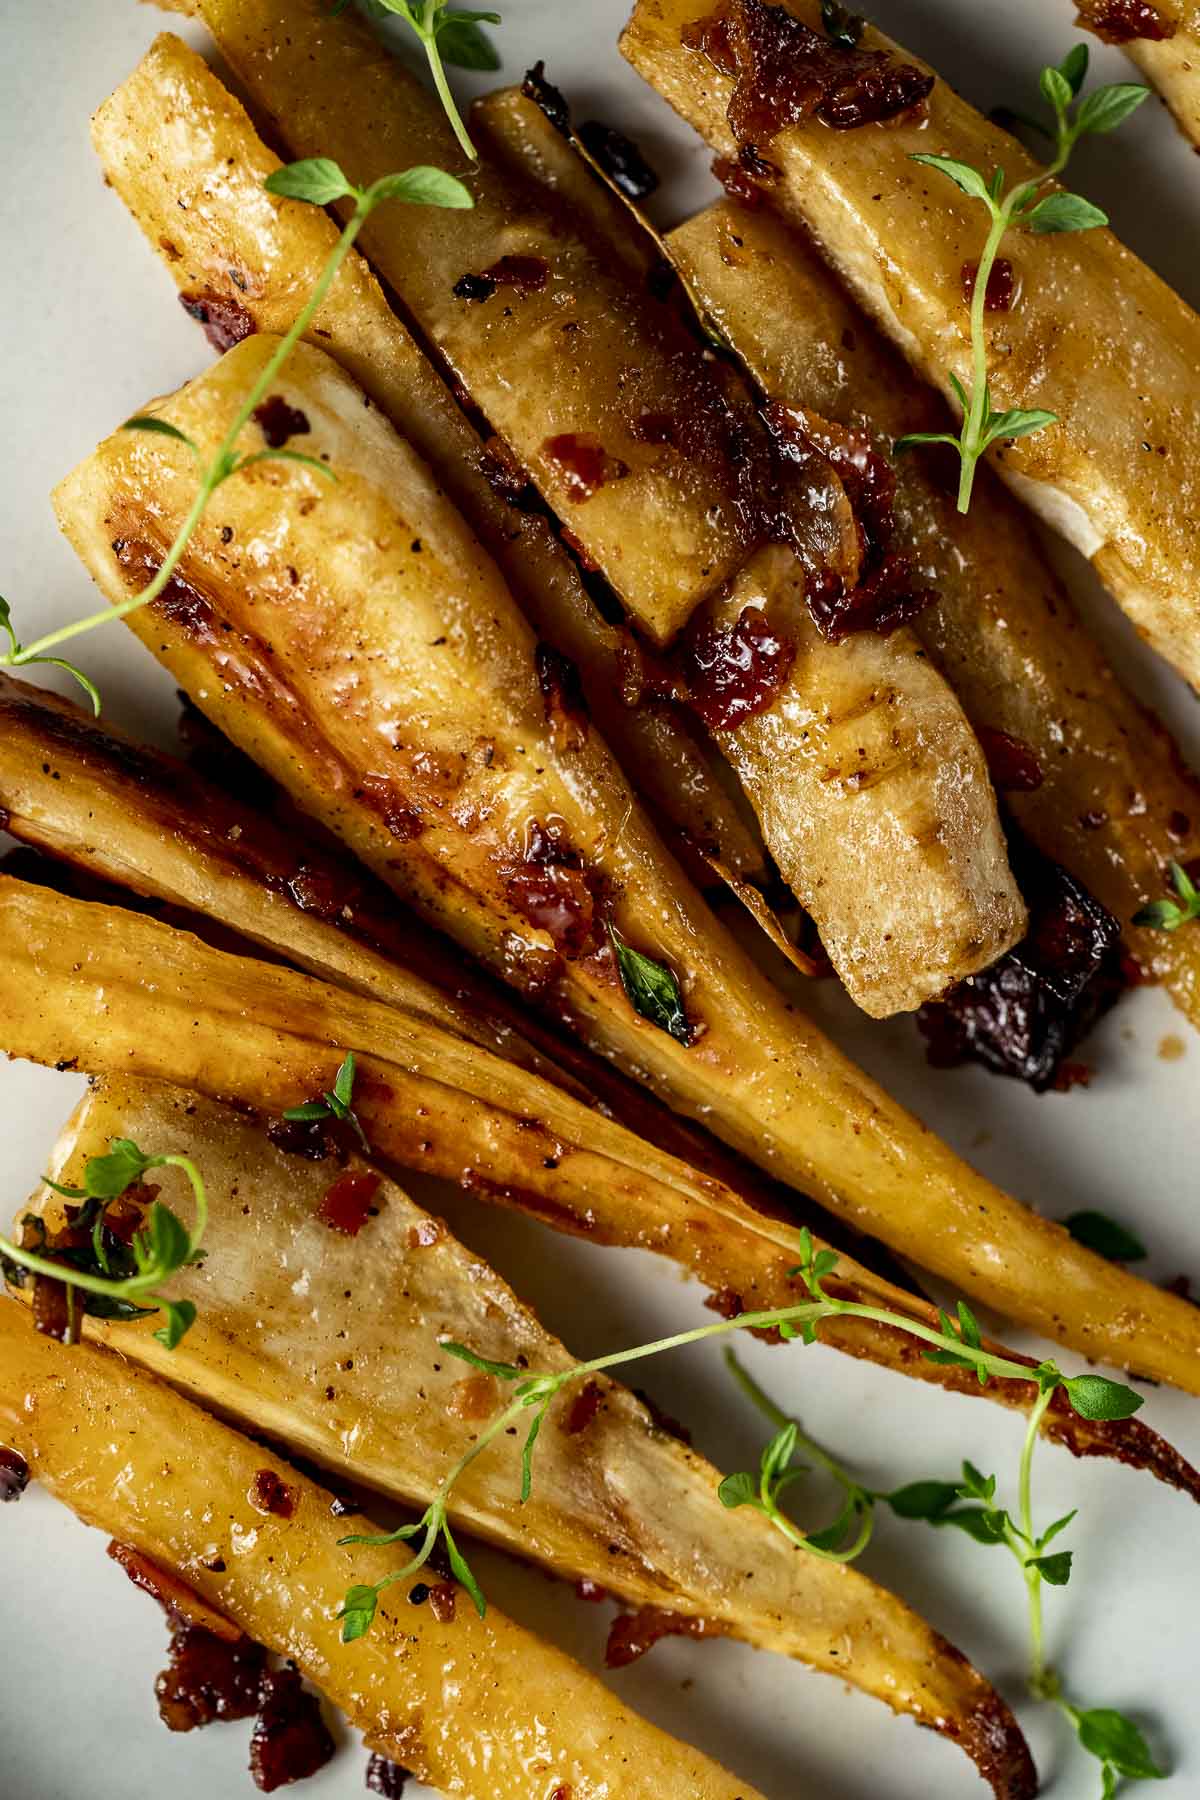 Up close view of roasted parsnips arranged on a plate.